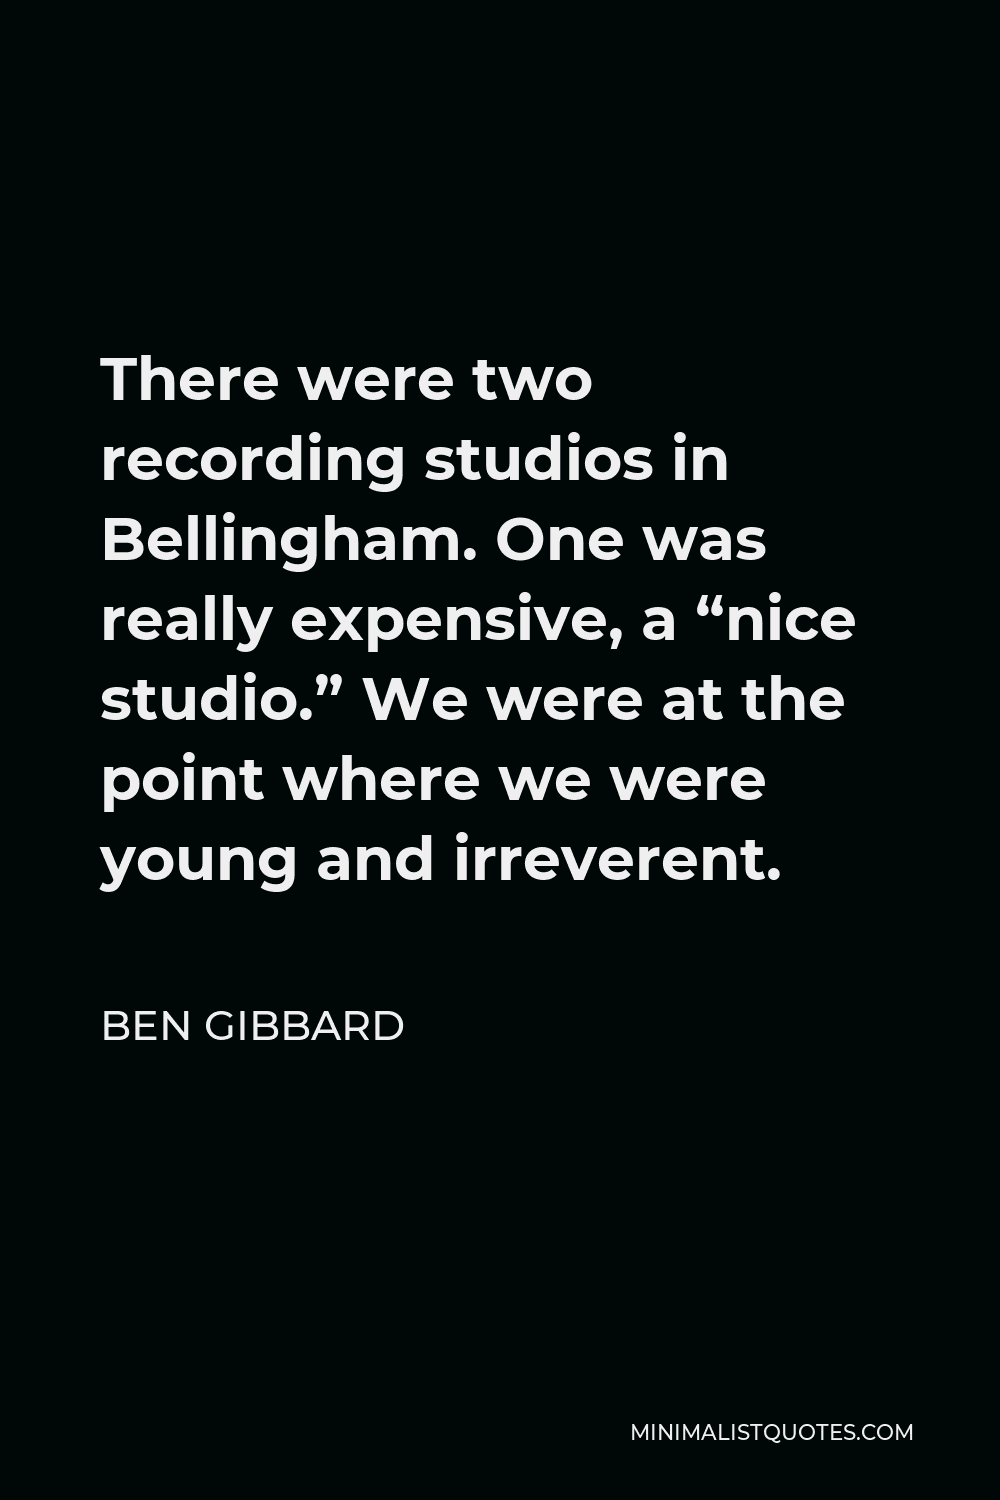 Ben Gibbard Quote - There were two recording studios in Bellingham. One was really expensive, a “nice studio.” We were at the point where we were young and irreverent.